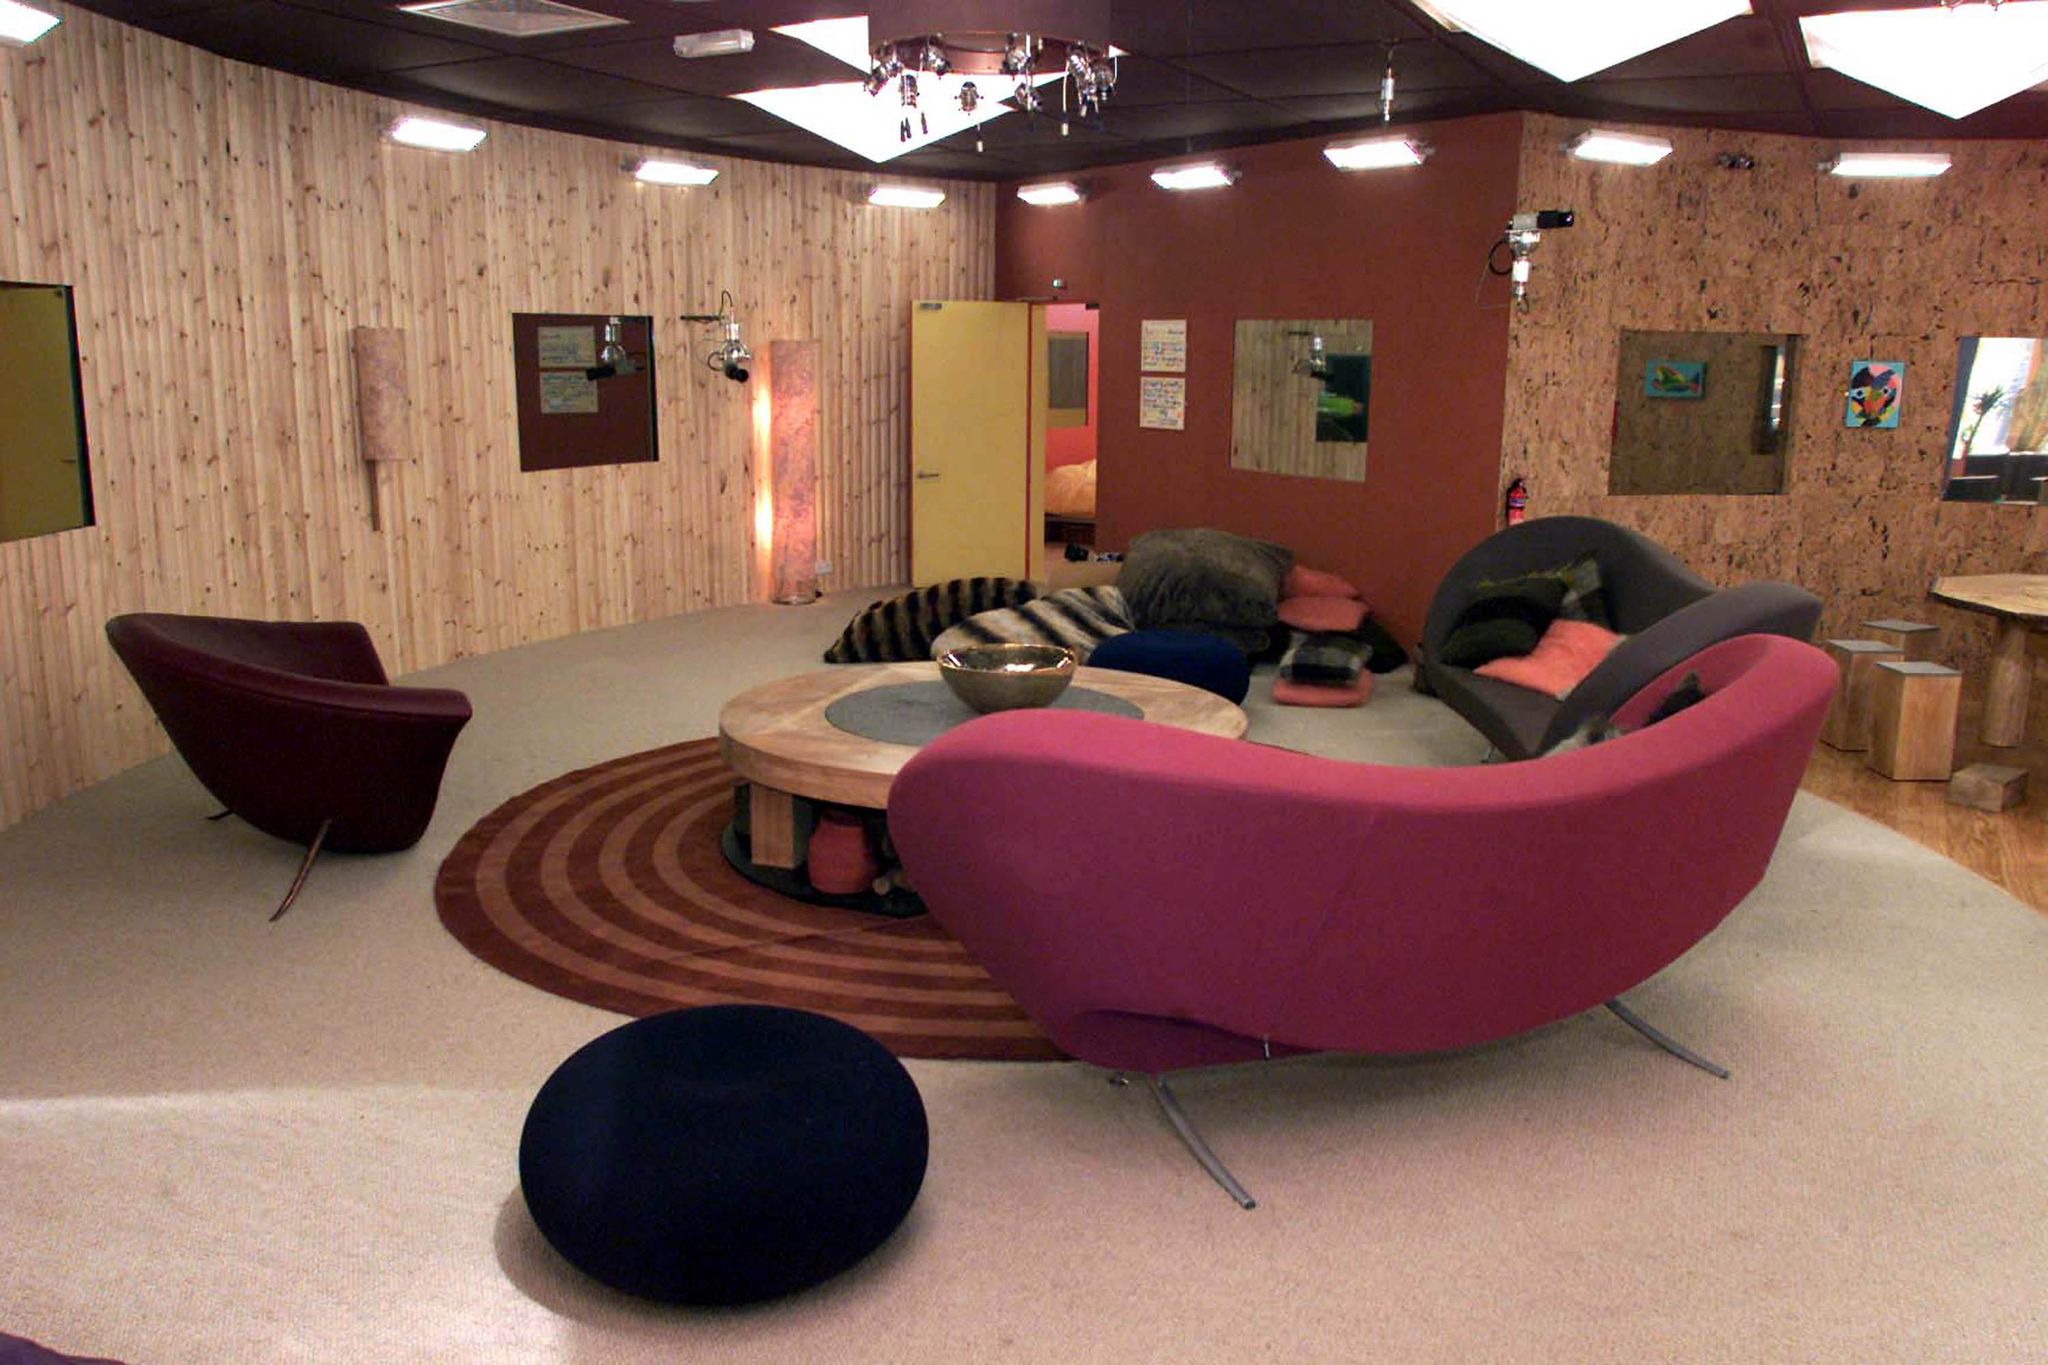 london   april 28 the new cabin style living room for the big brother 2 house on april 28, 2001 in london photo by dave hogangetty images